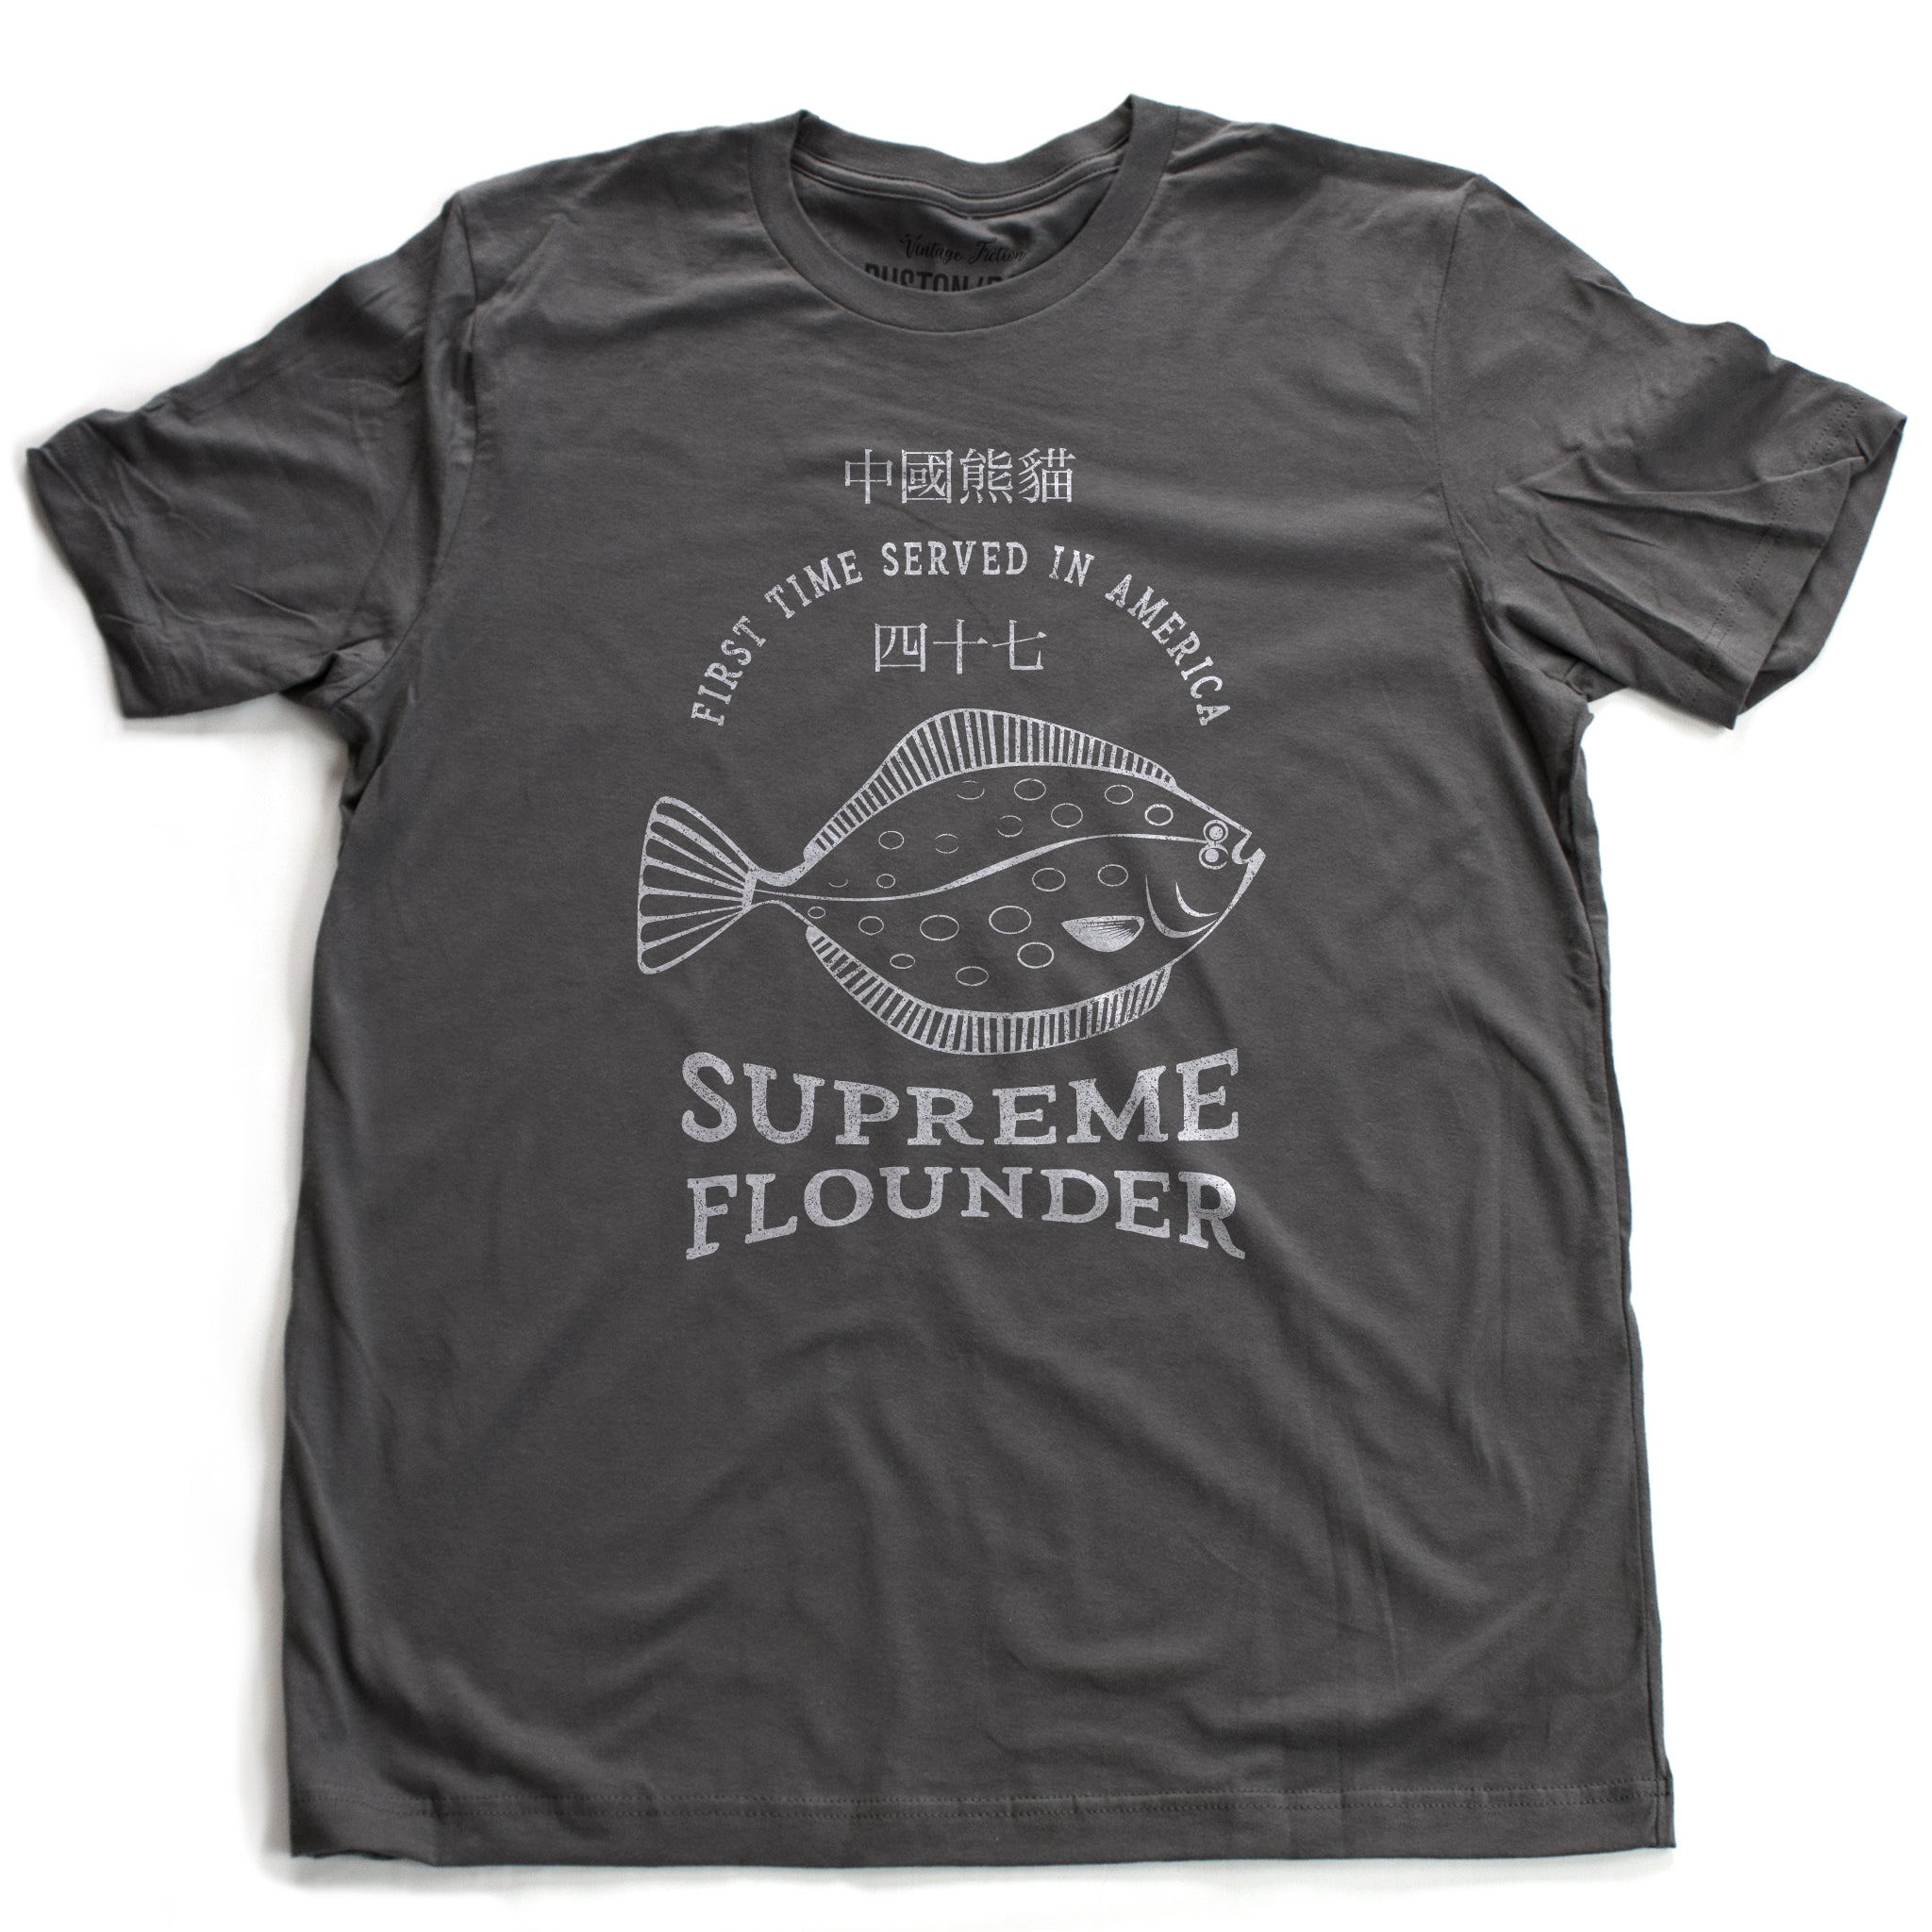 A fashionable retro design t-shirt, inspired by a Seinfeld tv episode, and Julia Louis-Dreyfus’ Elaine Benes’ character’s favorite Chinese food dish. The graphic is a fish, with the words SUPREME FLOUNDER, First Time Served in America, and Chinese characters. From fashion brand RUSTON/BOND for wolfsaint.net